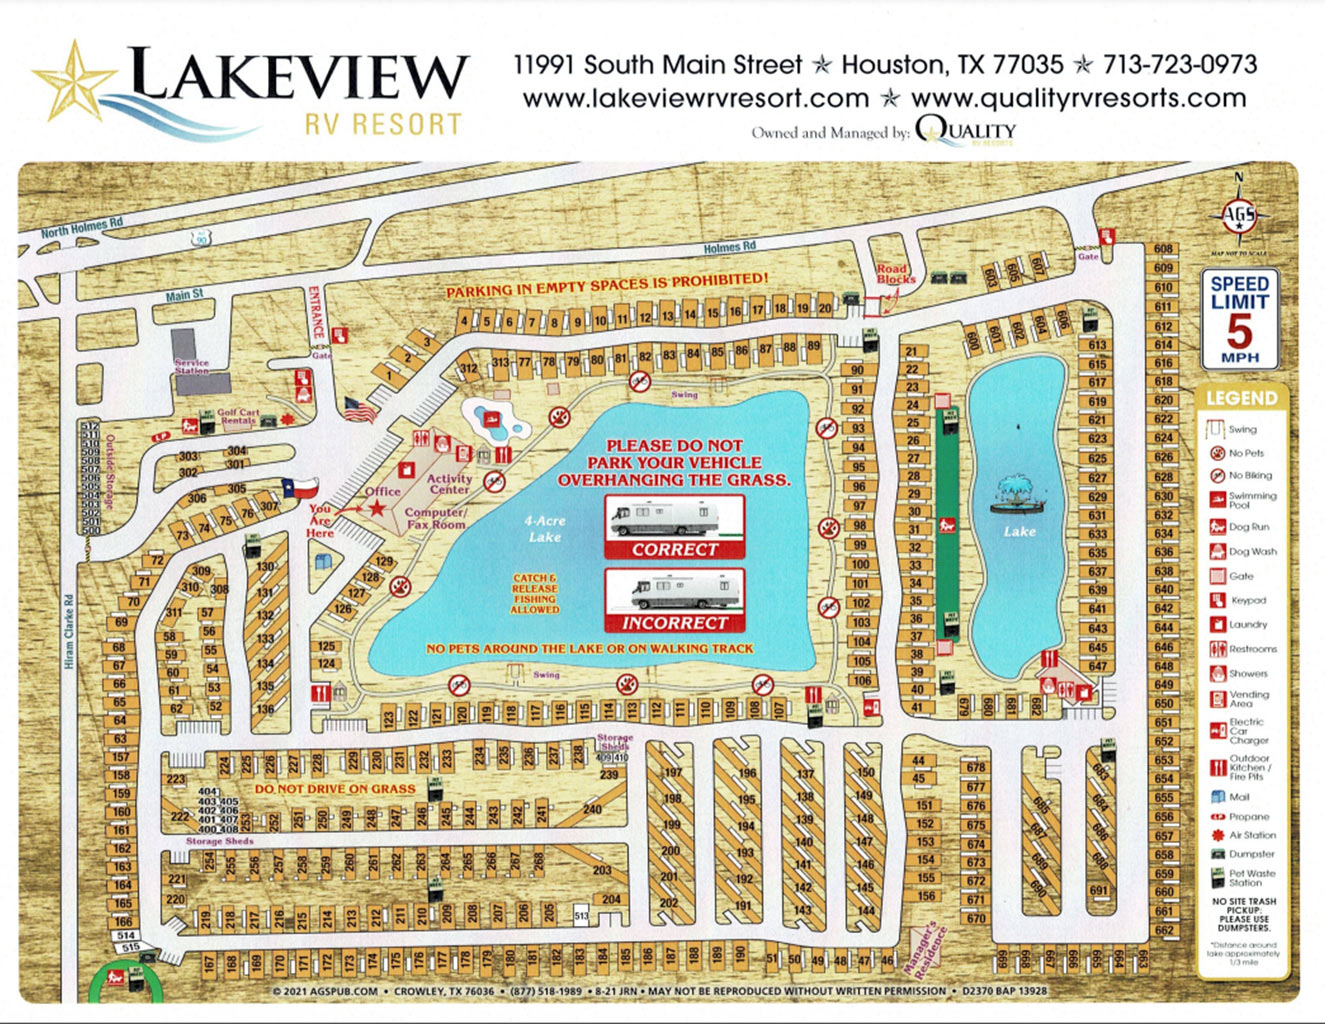 Lakeview RV Resort Park Map